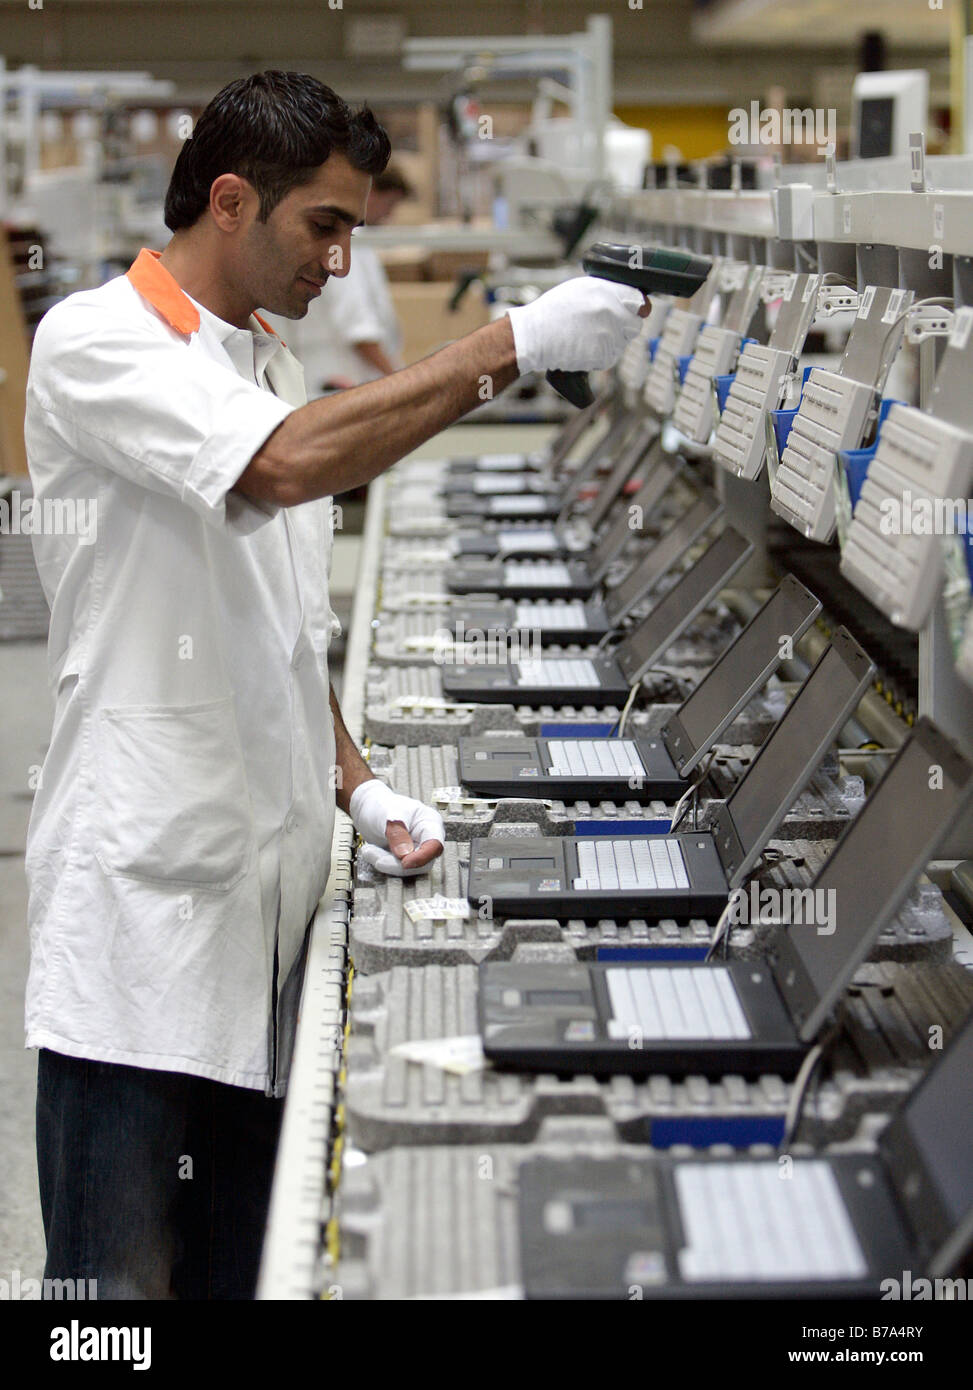 Employee of the computer production at the function test, final inspection of a notebook at the Fujitsu Siemens GmbH in Augsbur Stock Photo